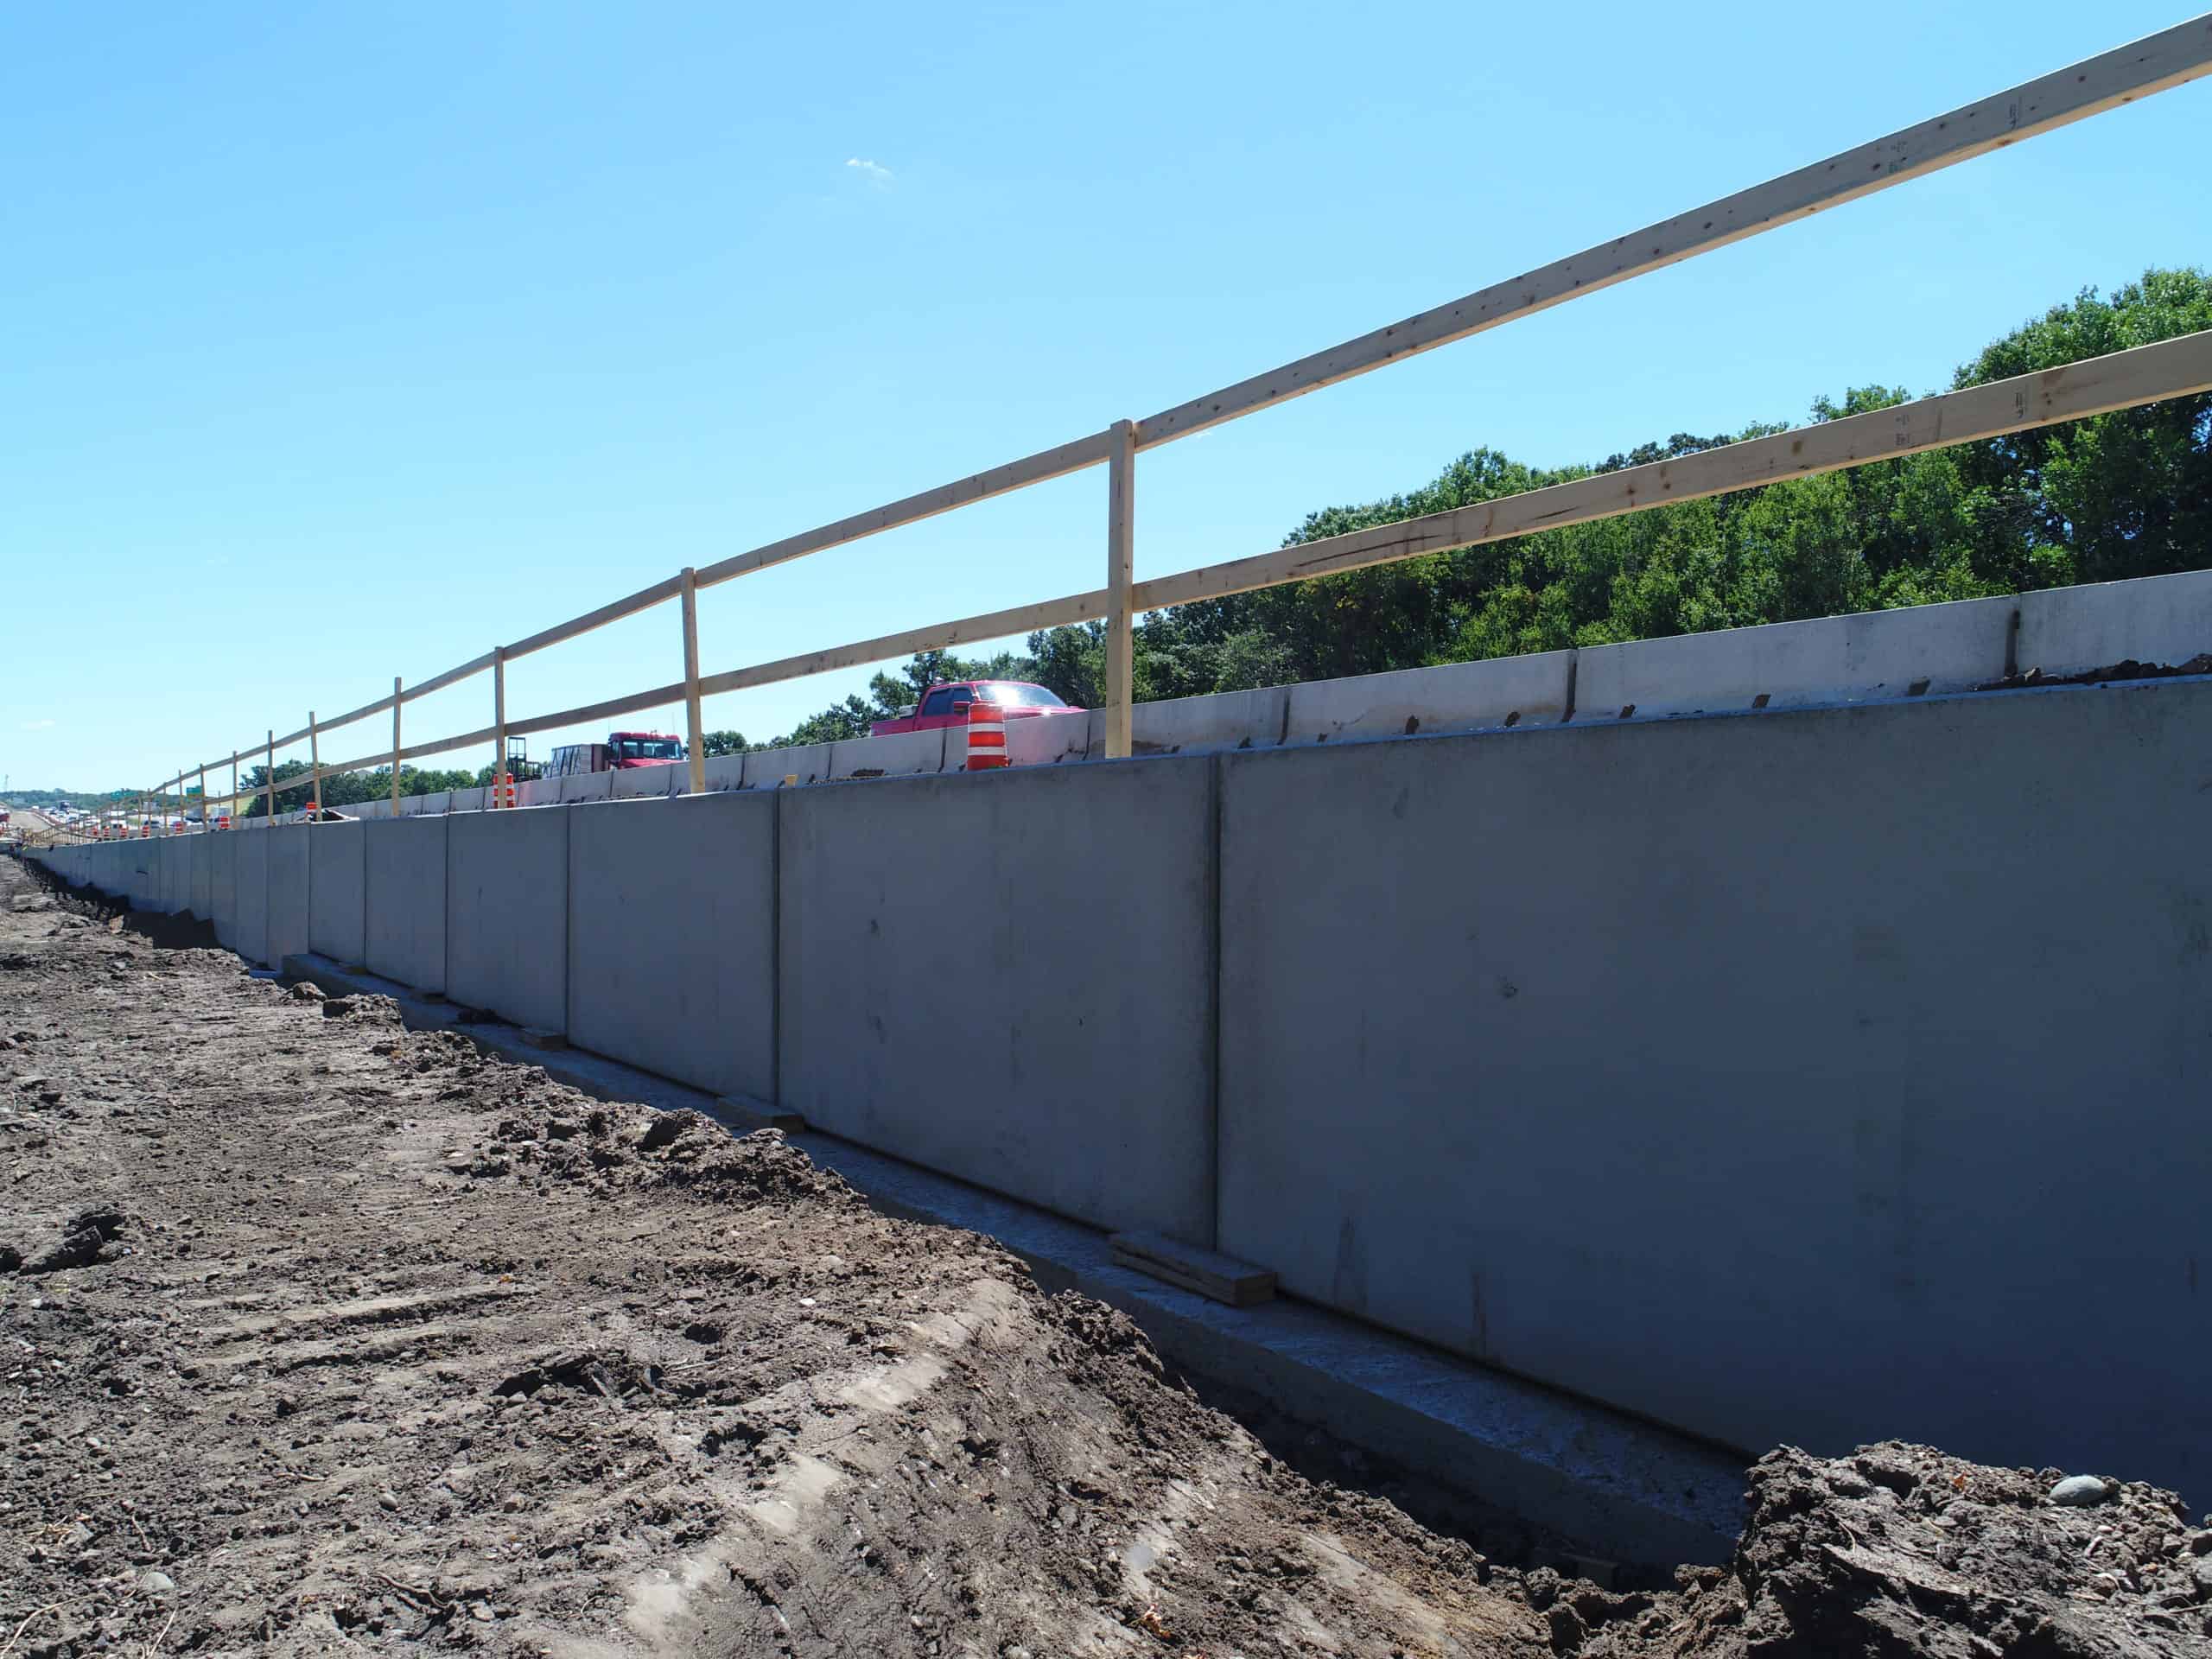 I-94 WisDOT MSE Retaining Wall and Median Barrier Project by Wieser Concrete